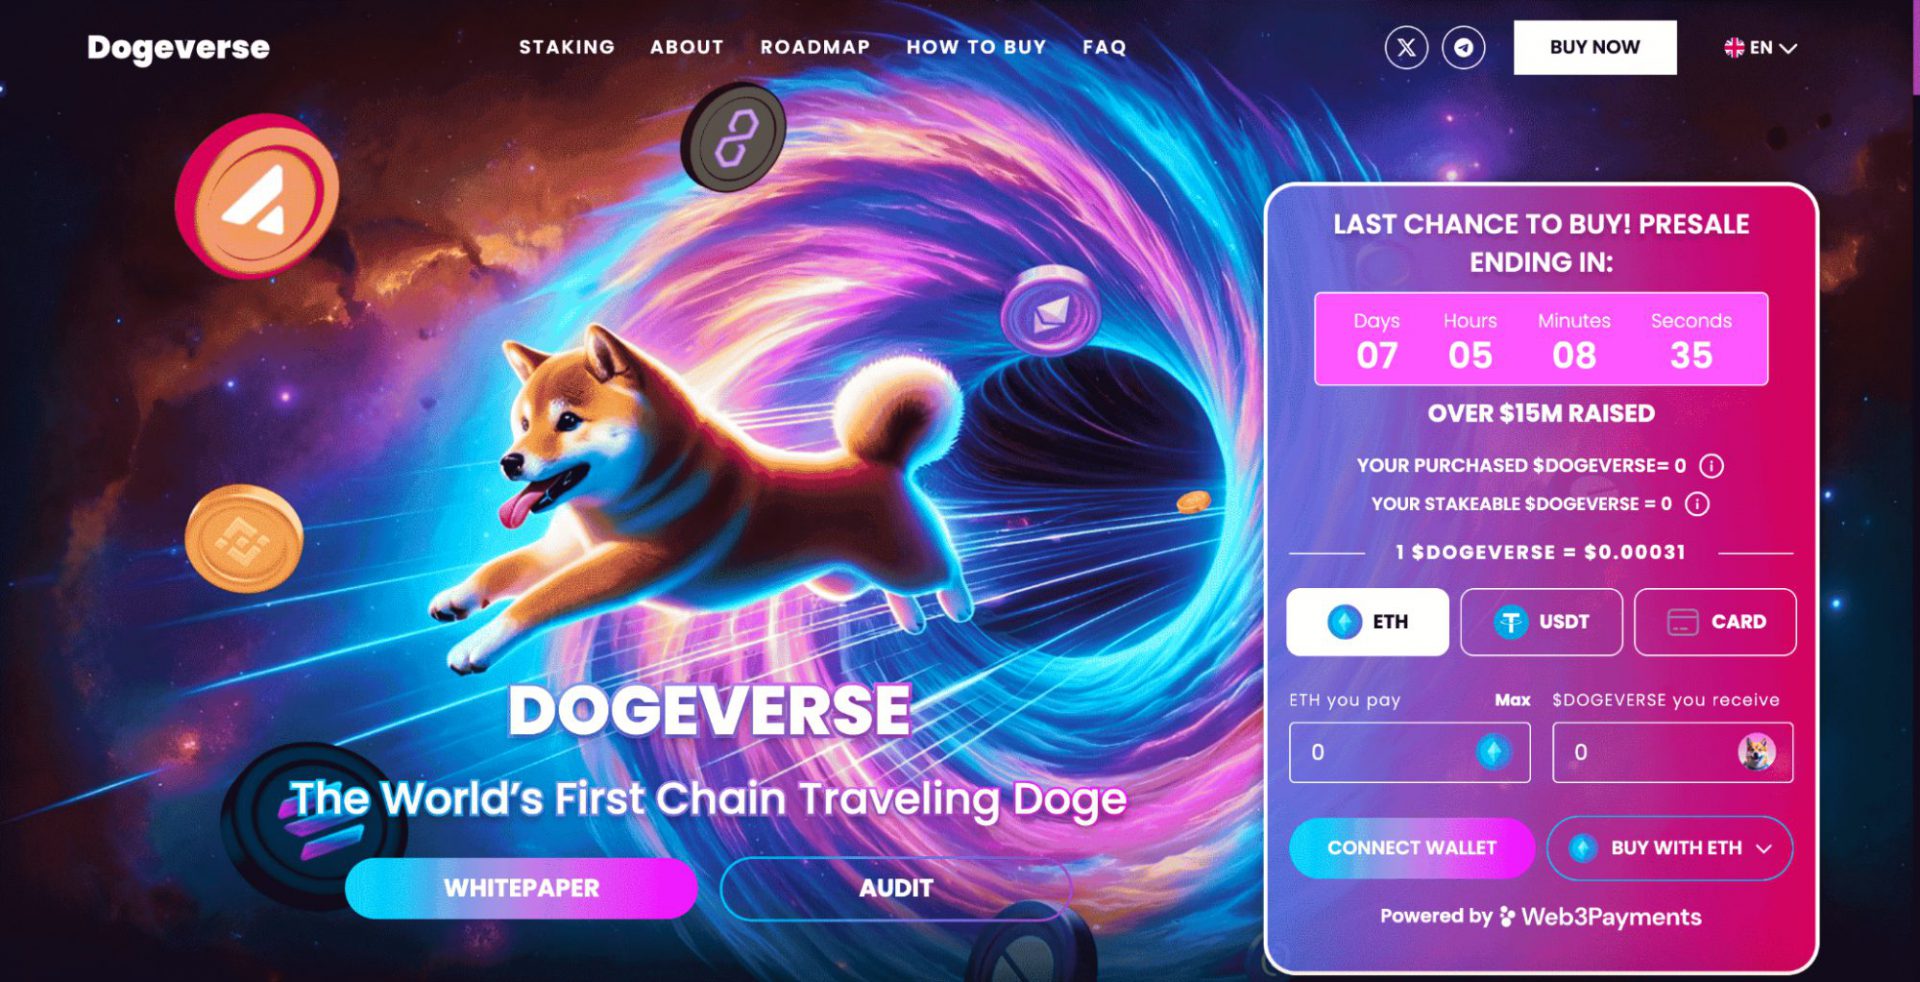 This Meme Coin Has Raised Over $15M – Final Chance to Buy Dogeverse Before Presale Ends in 3 Days